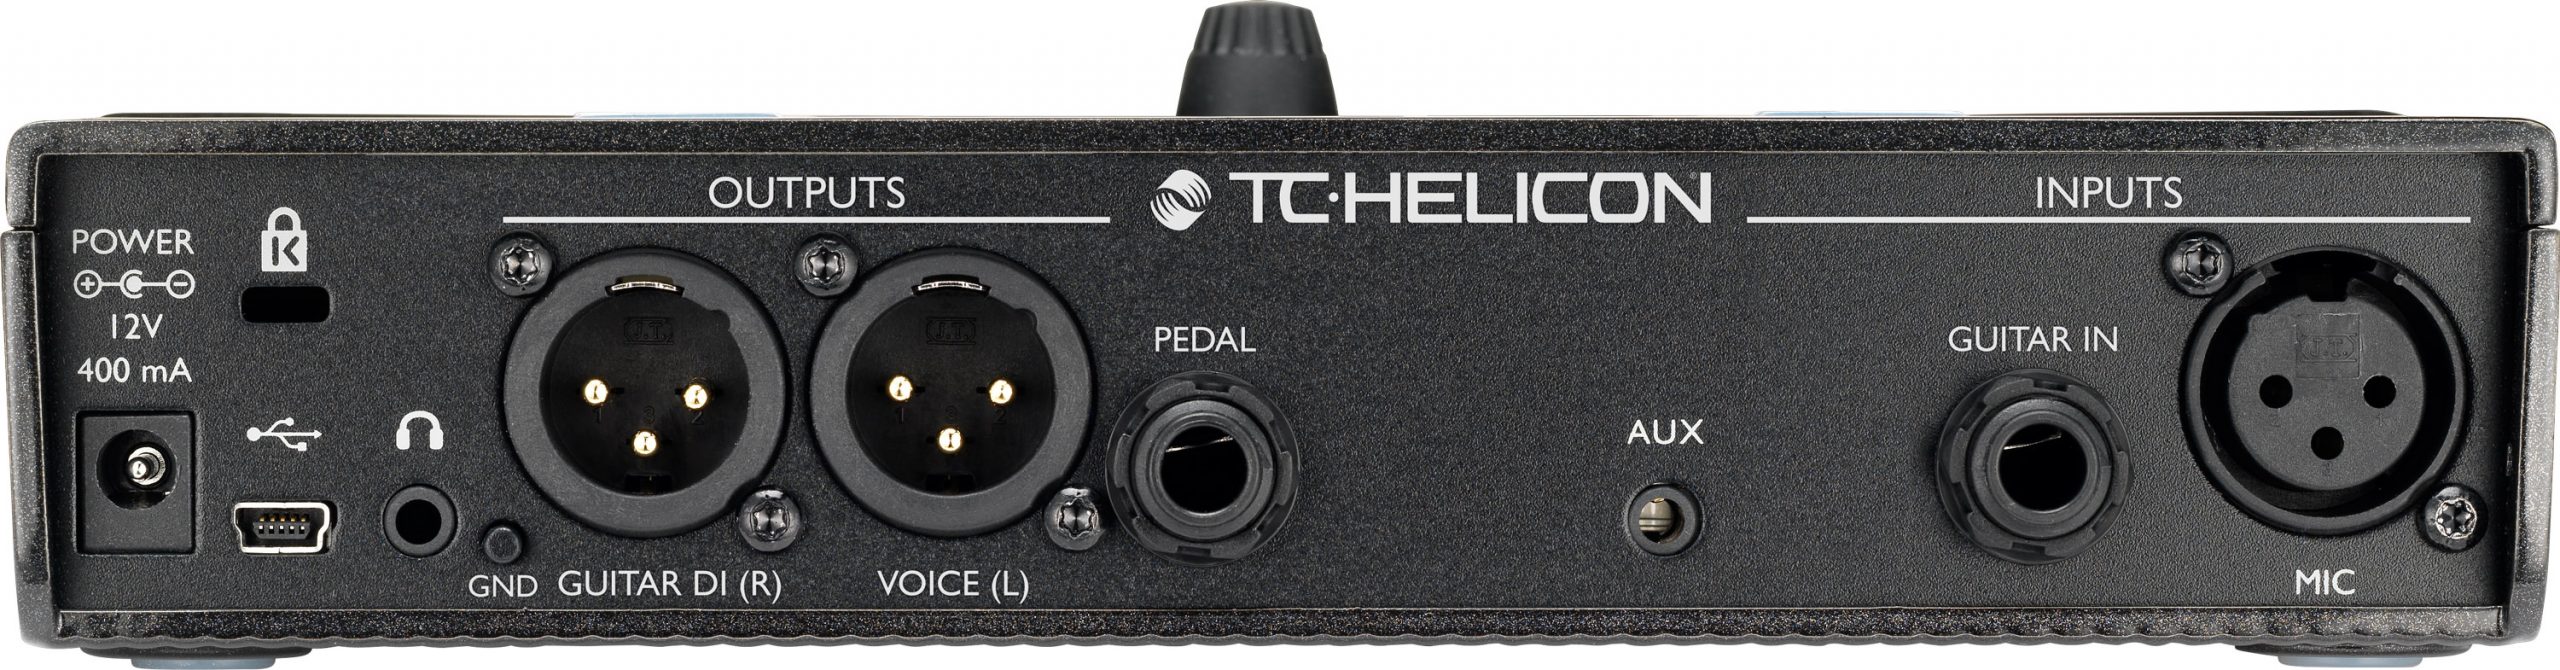 TC-Helicon Play Acoustic FX Processor - Elevated Audio